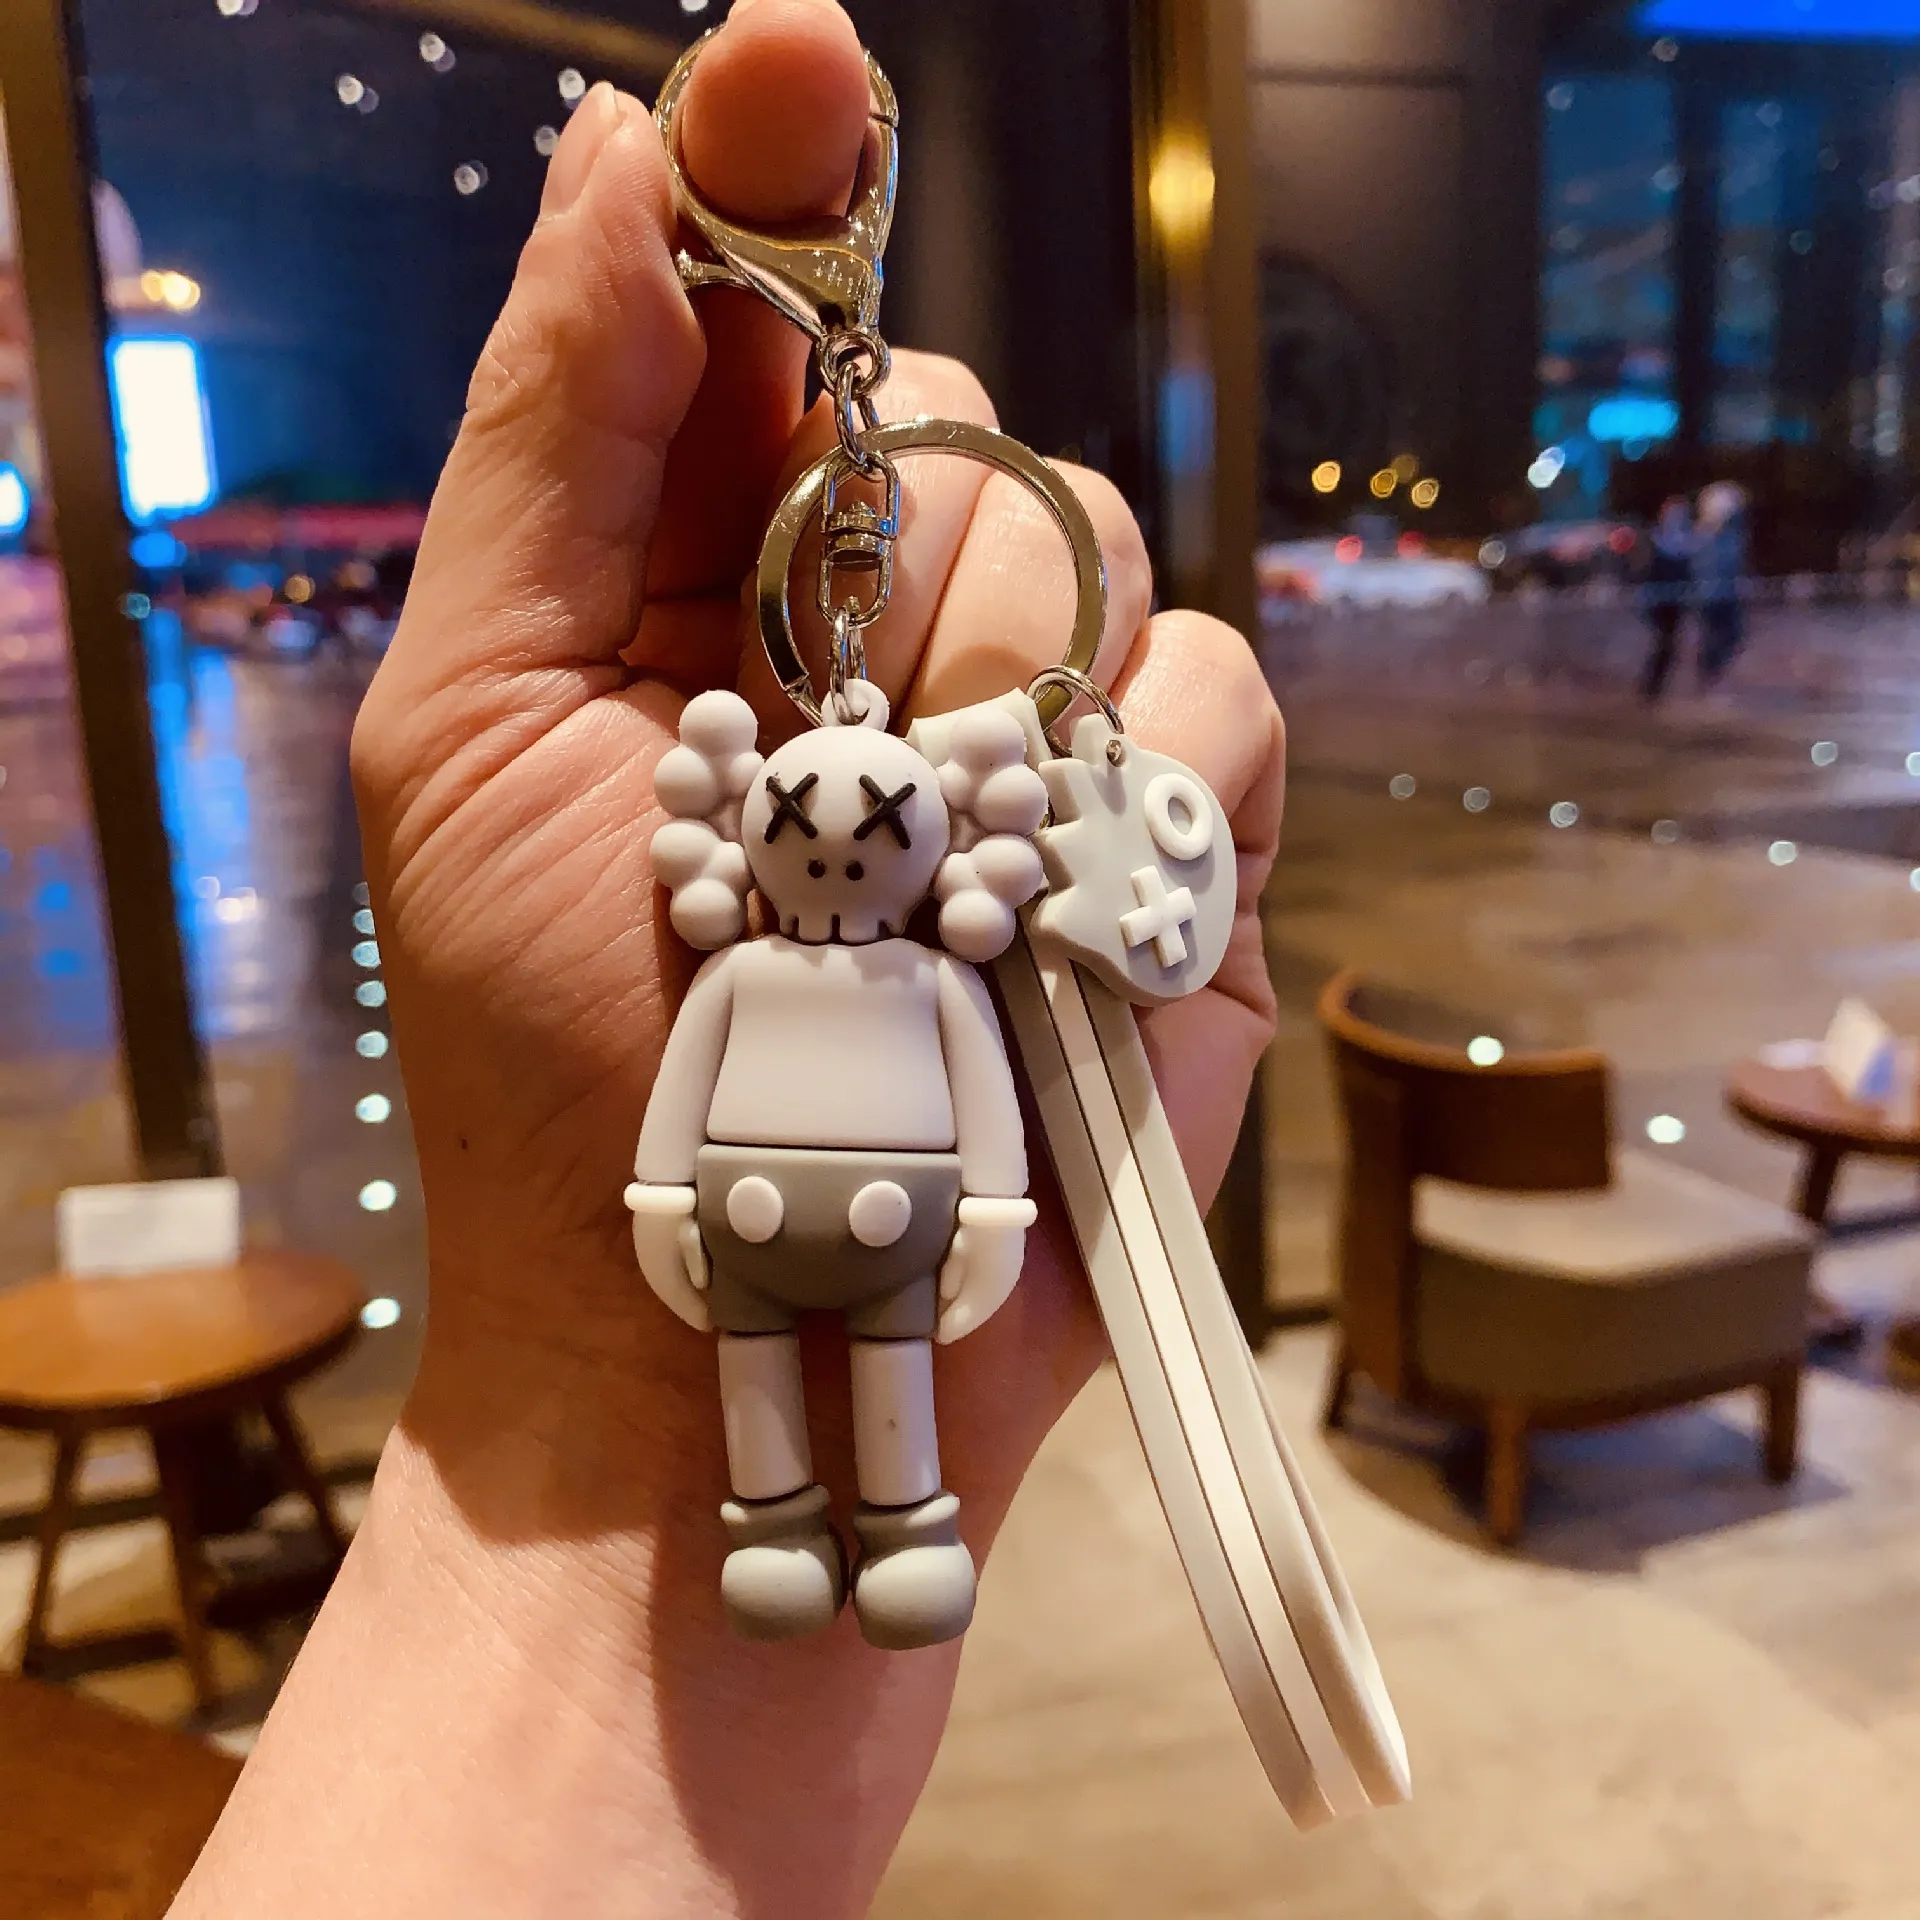 BX007 Kaws Doll Designer Key Rings Keychain New Fashion Sesame Street  Keychains Accessories PVC Action Figures Toys Bag Charms Car KeyRings  Holder From Shenzhen2020, $1.61